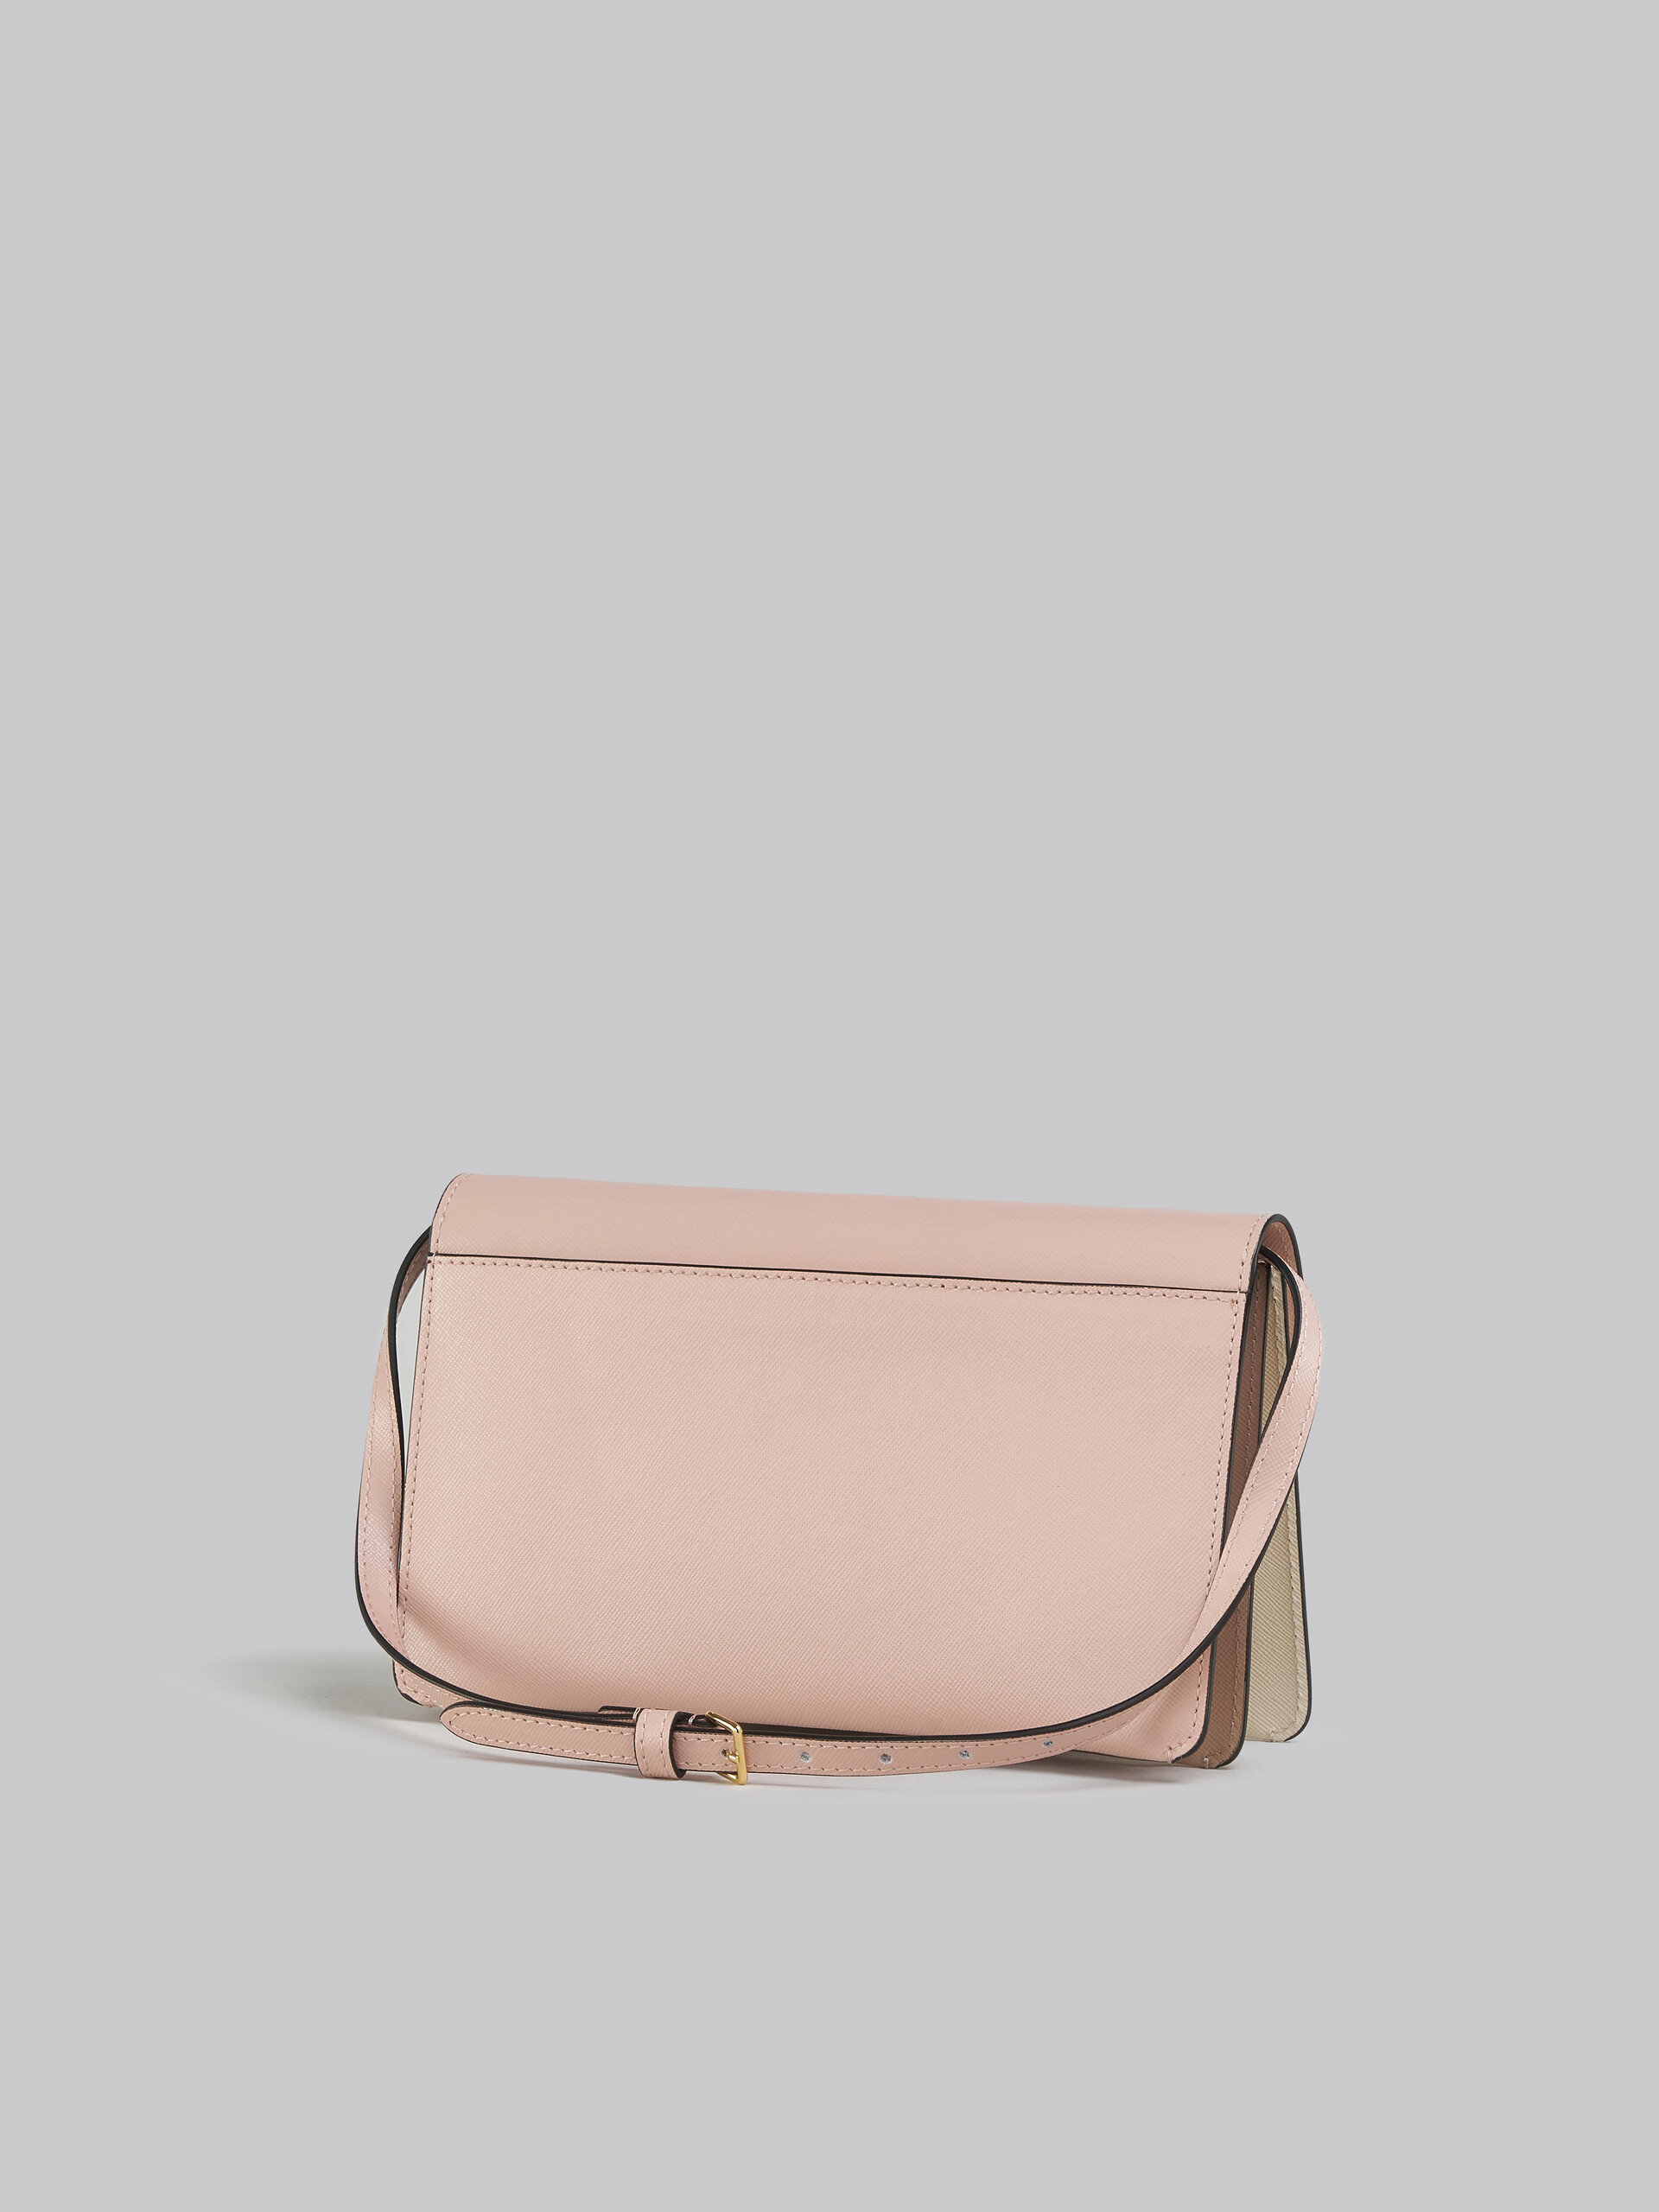 Trunk Clutch in pink white and beige saffiano leather - Pochette - Image 3